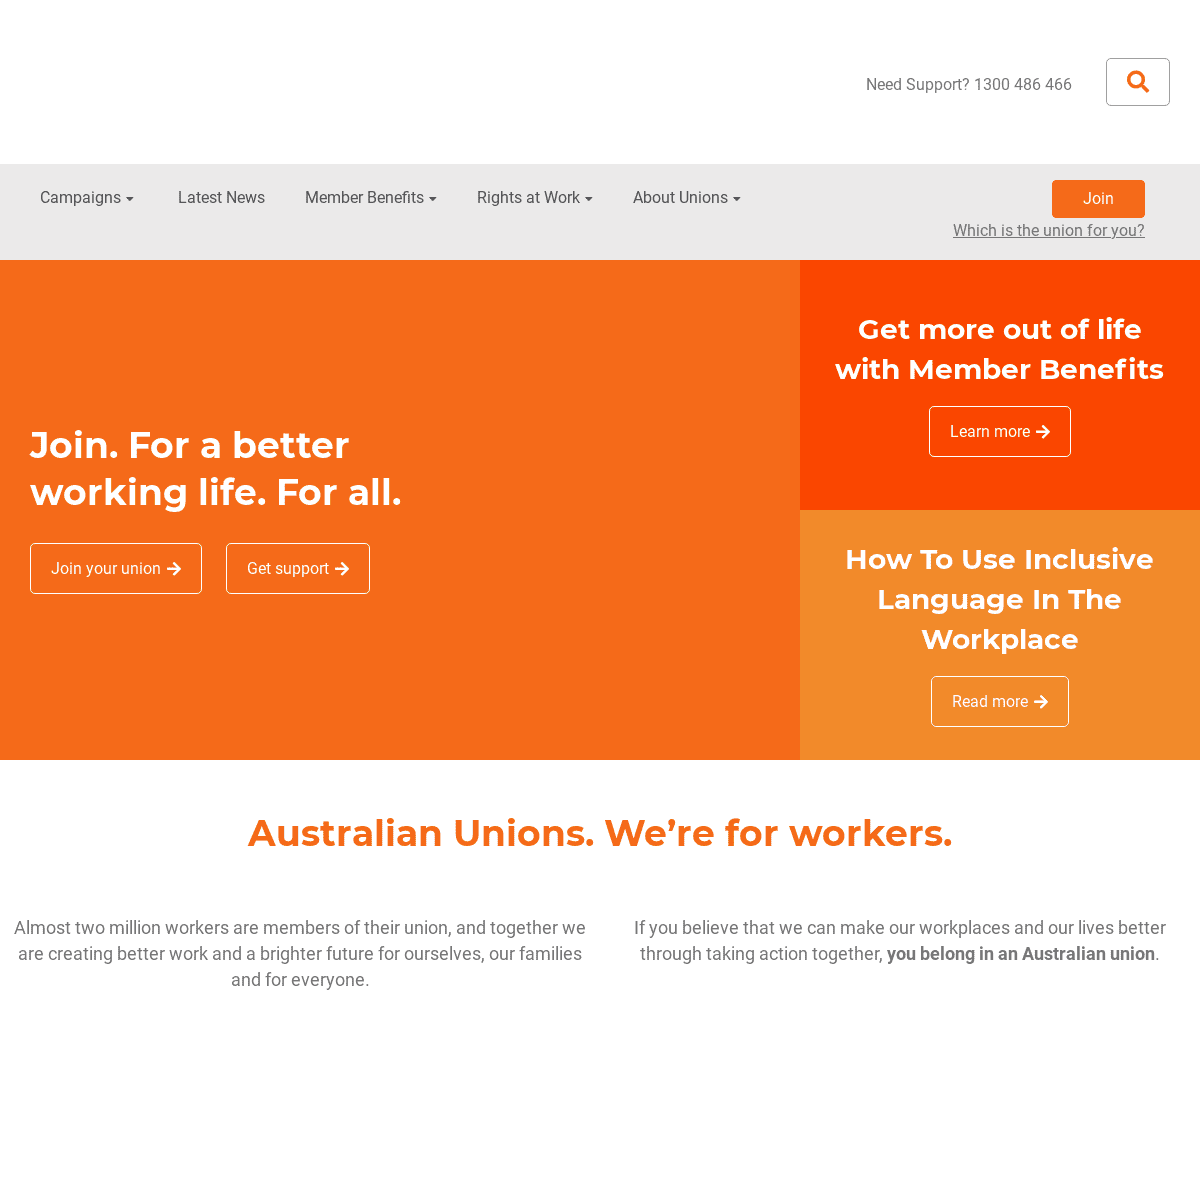 A complete backup of https://australianunions.org.au